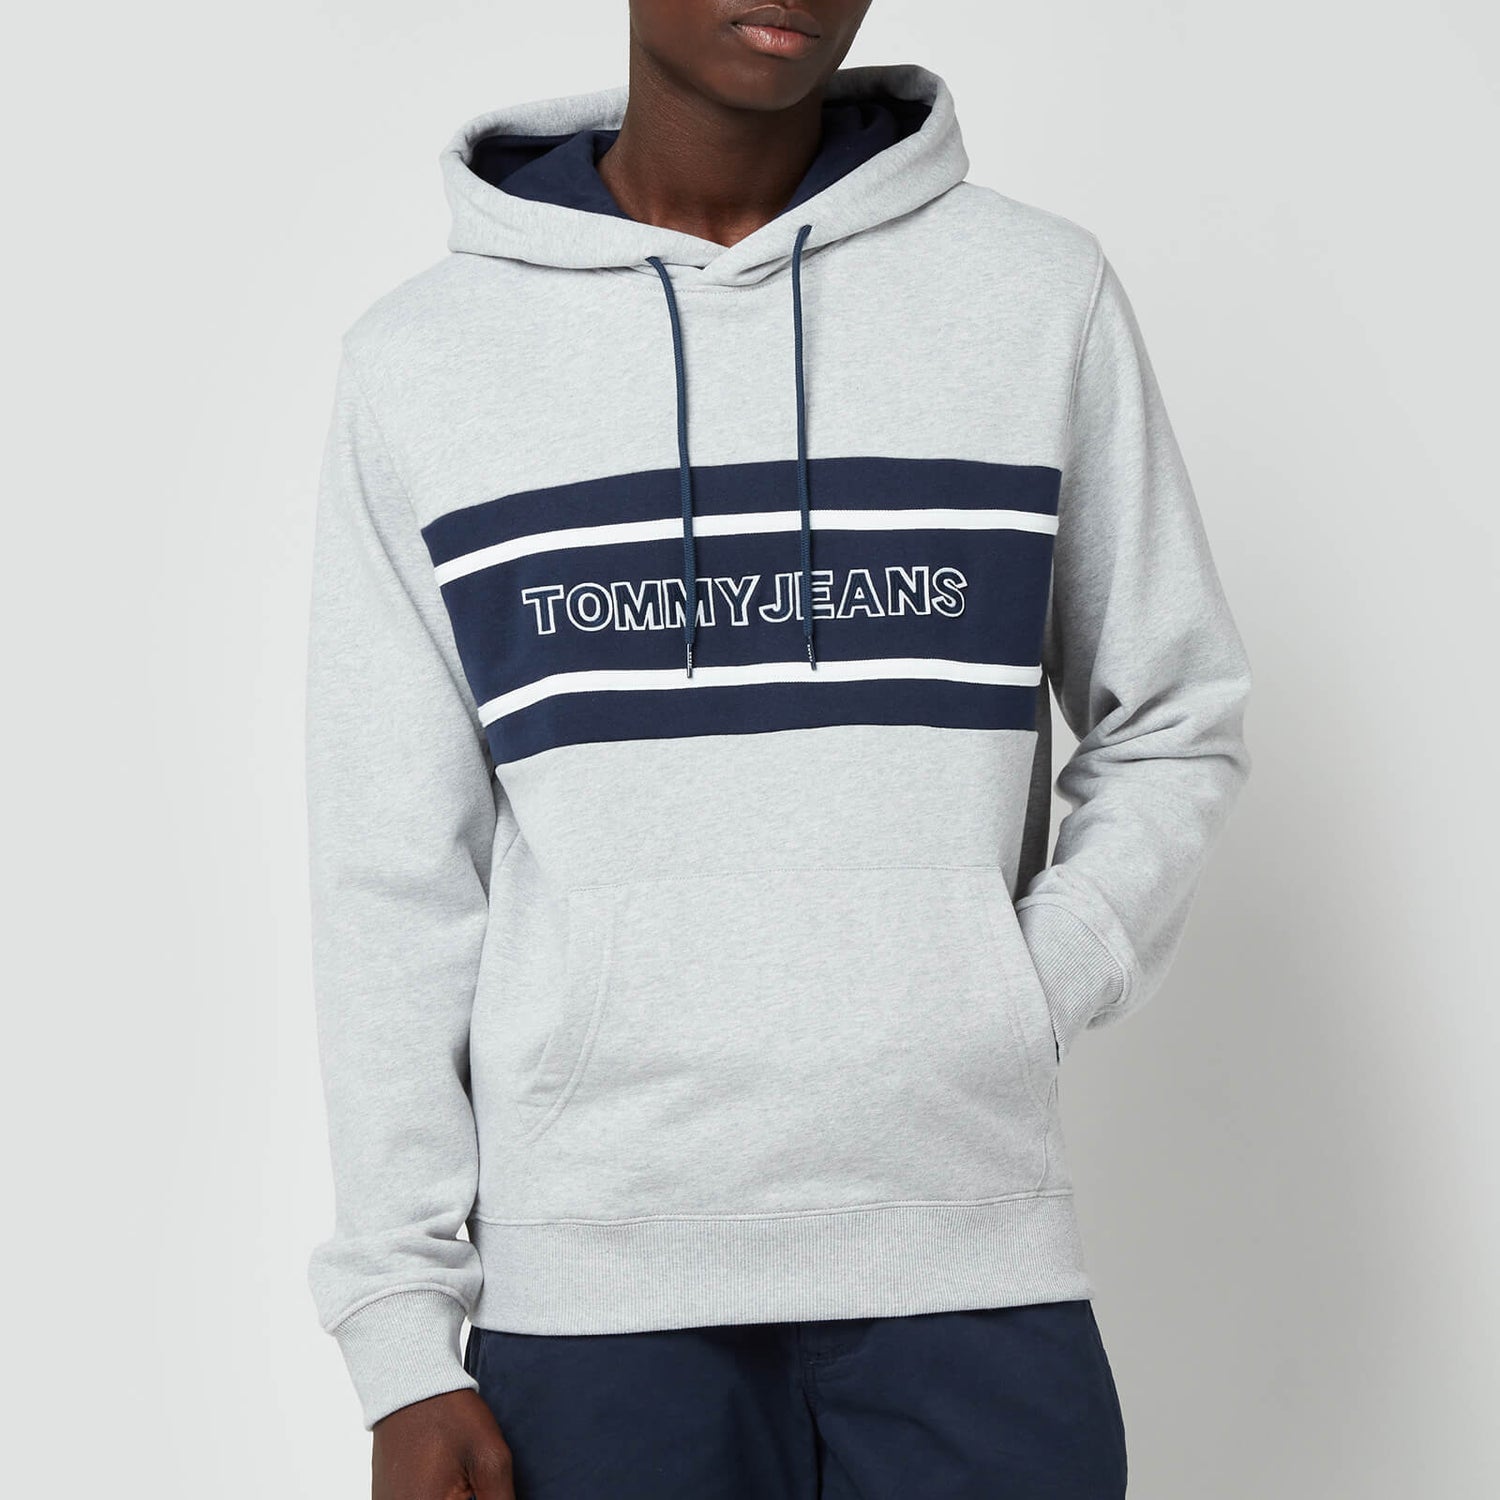 Tommy Jeans Men's Pieced Band Hoodie - Light Grey Hoodie